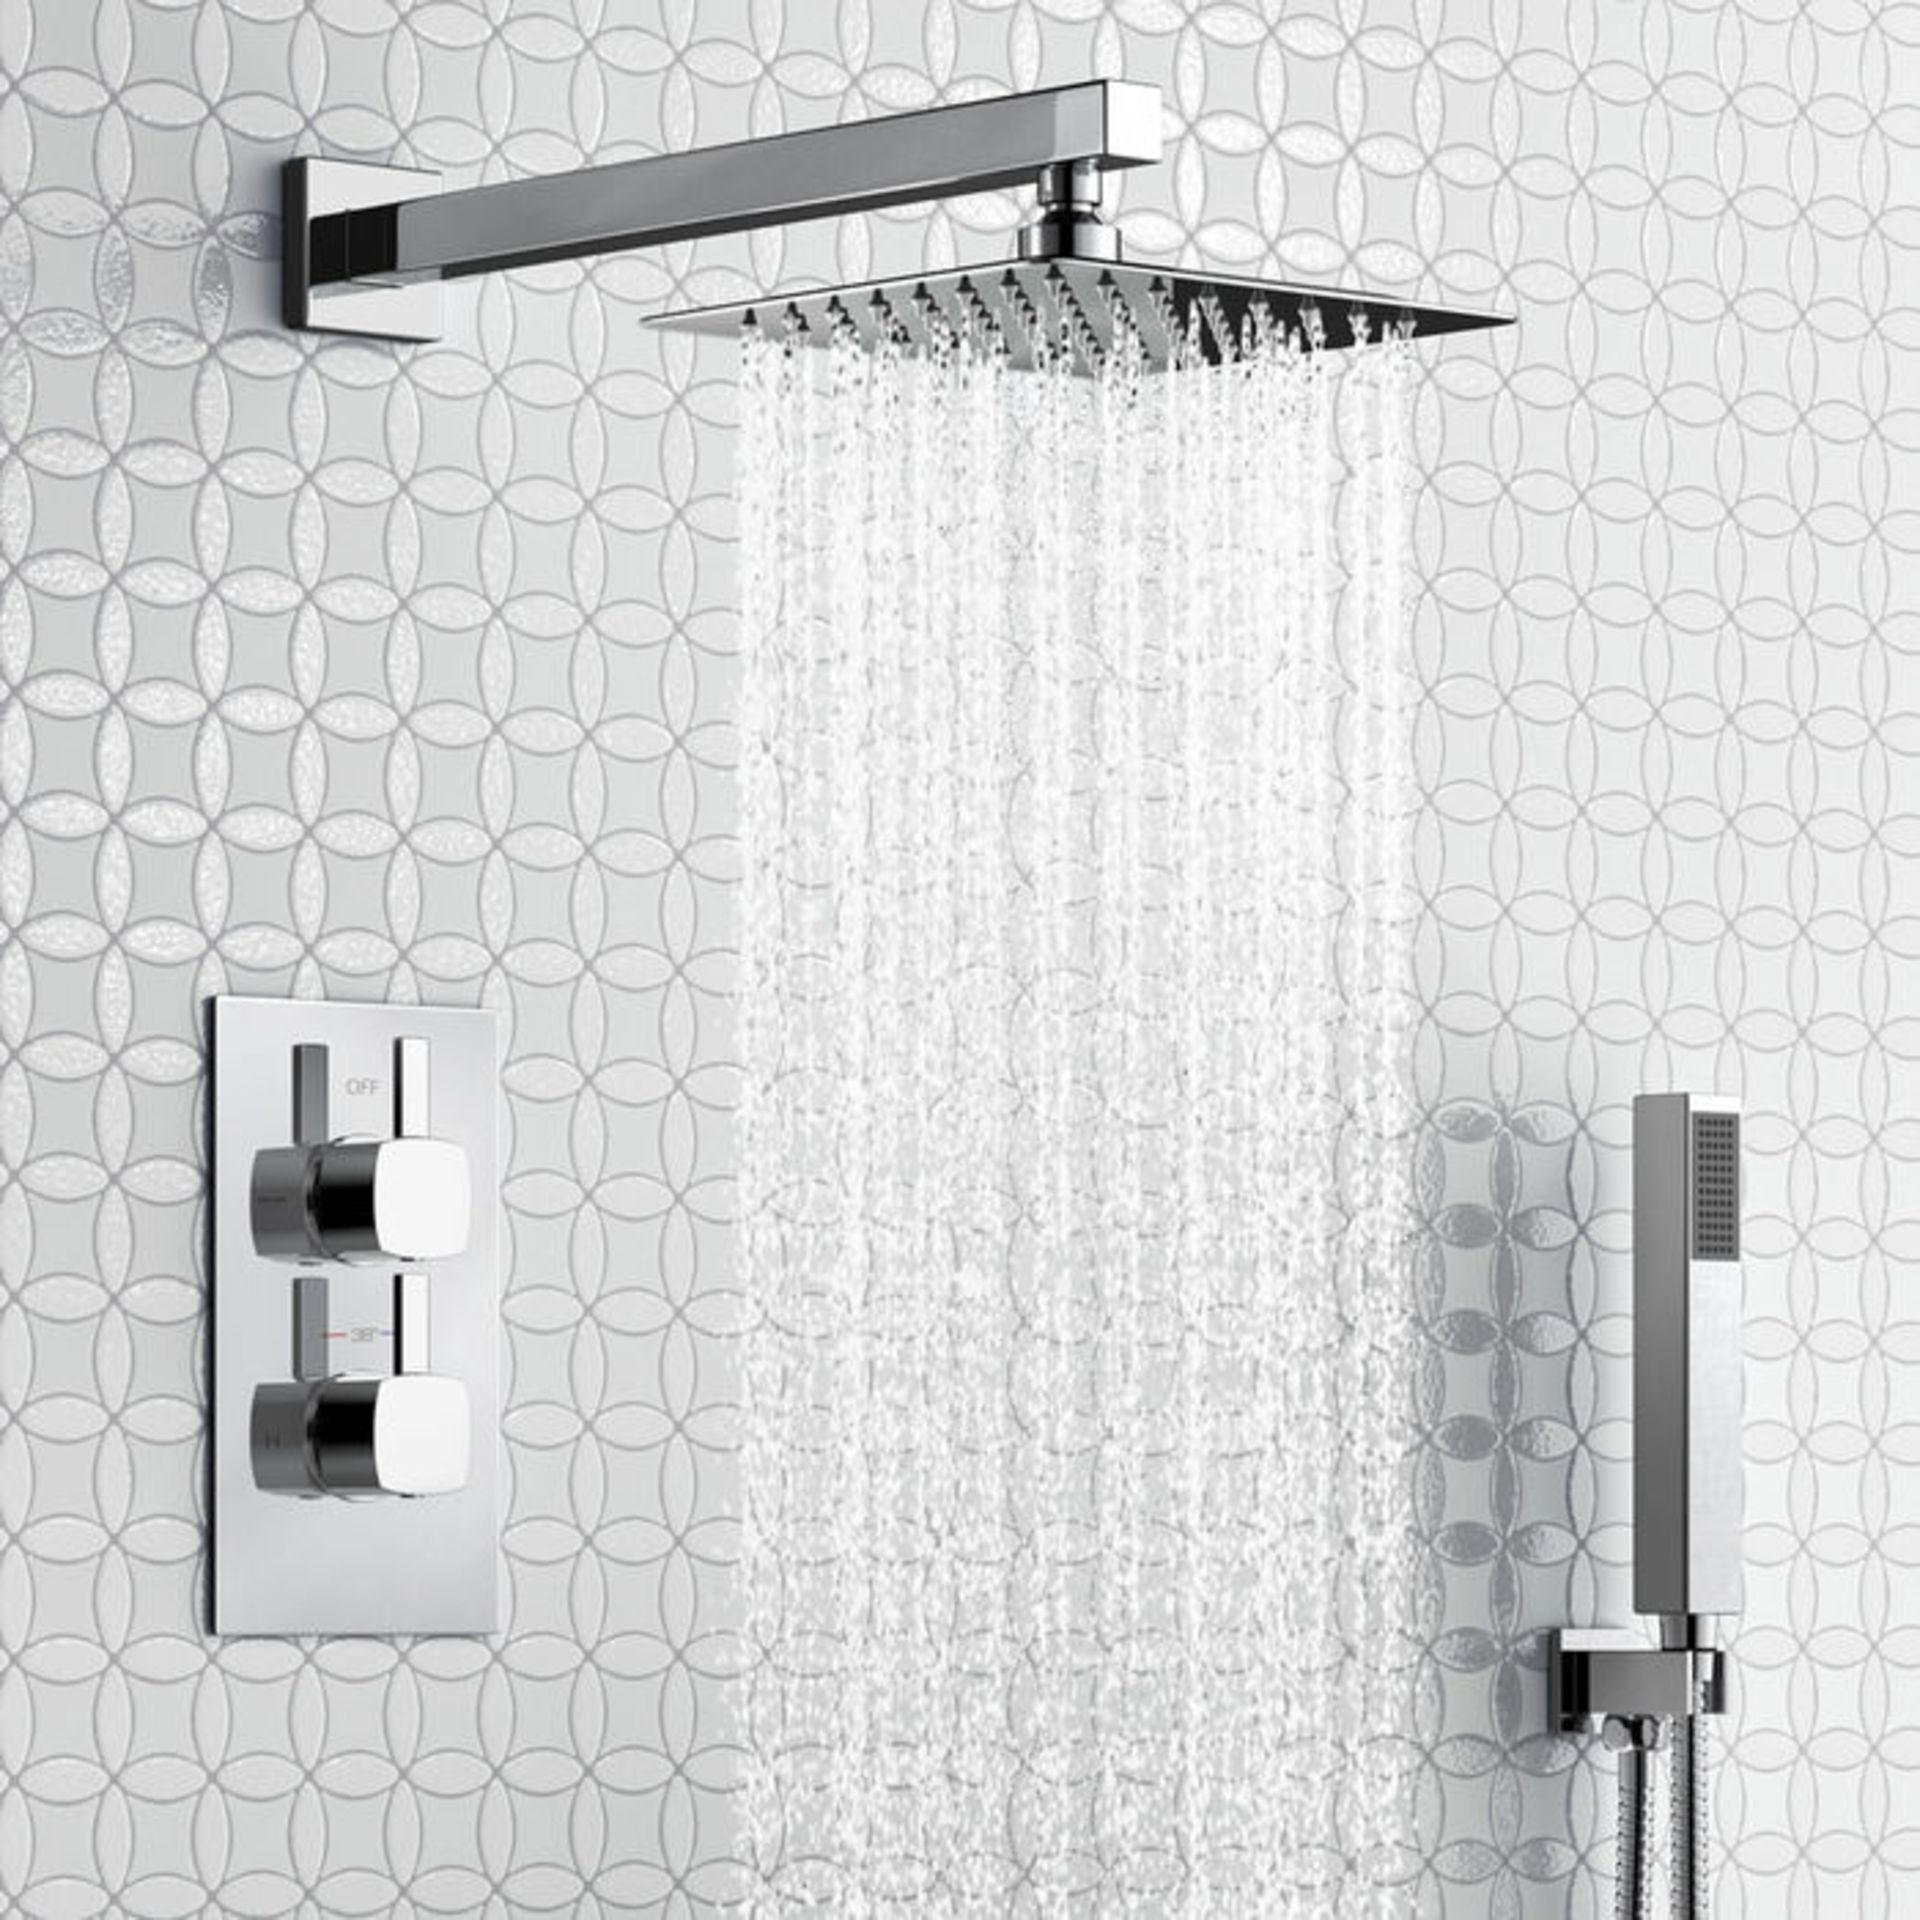 (PA78) Square Concealed Thermostatic Mixer Shower Kit & Medium Head. Family friendly detachable hand